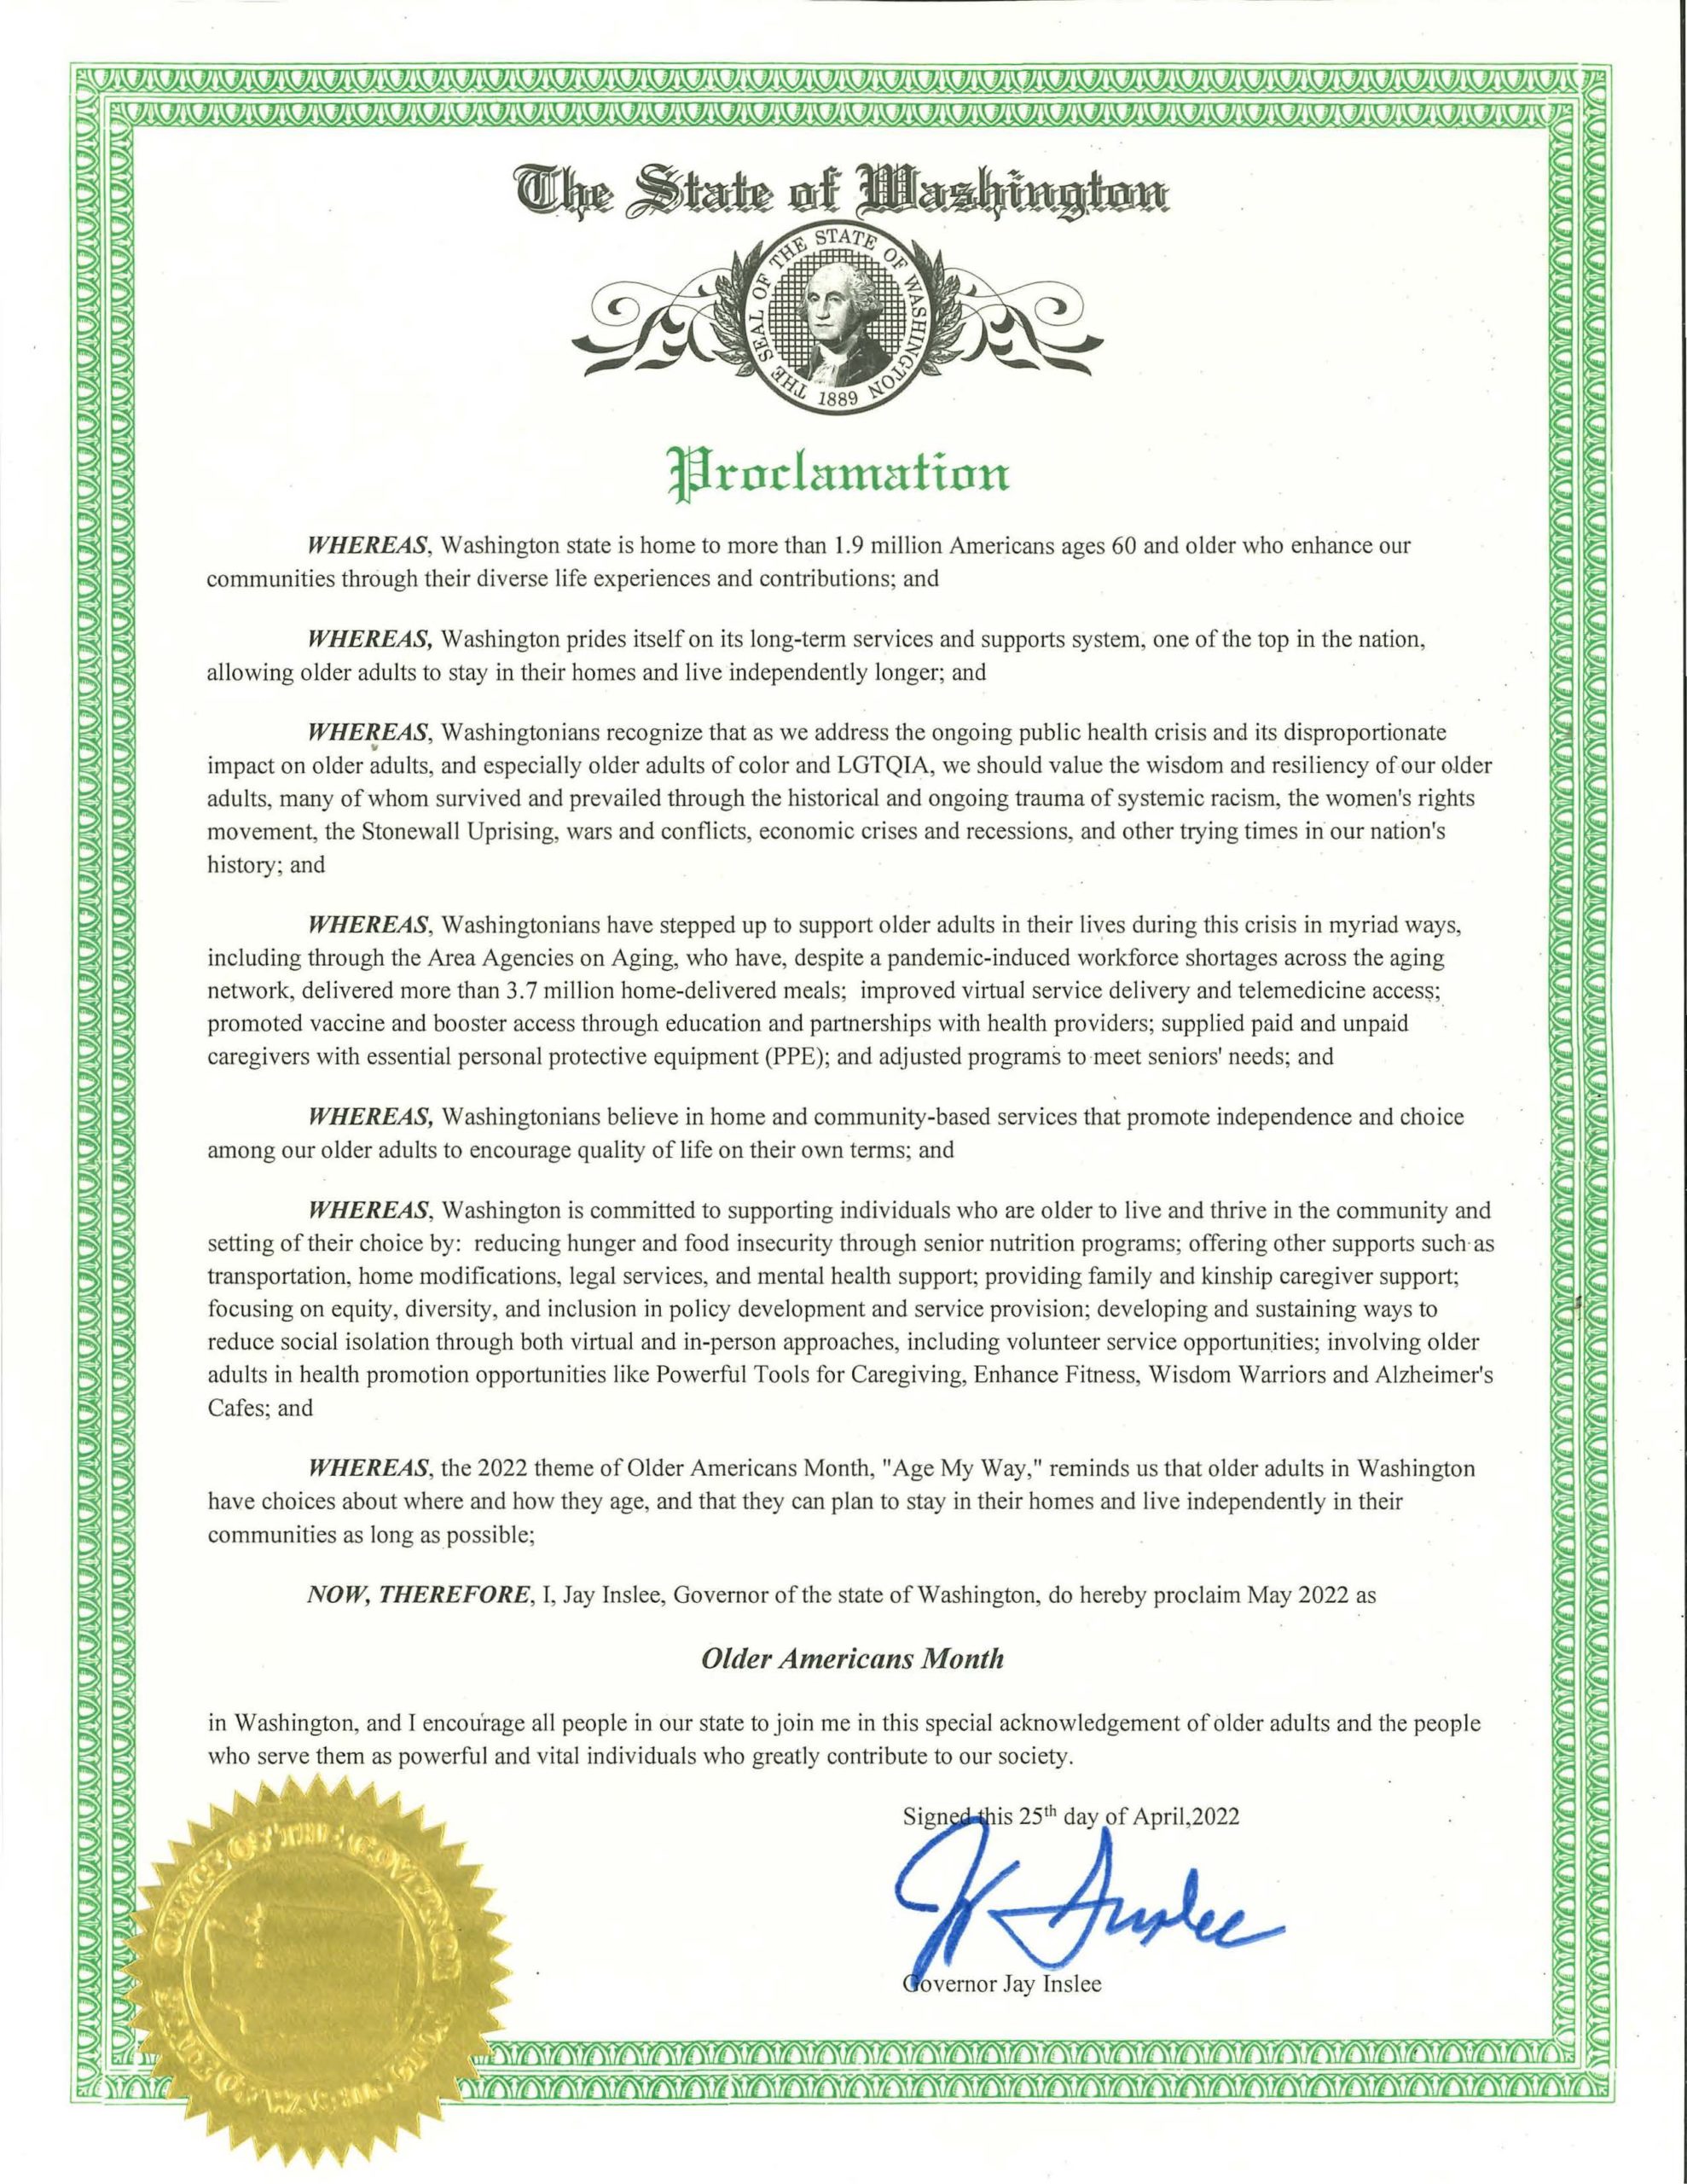 image for Governor Jay Inslee's 2022 proclamation for Older Americans Month